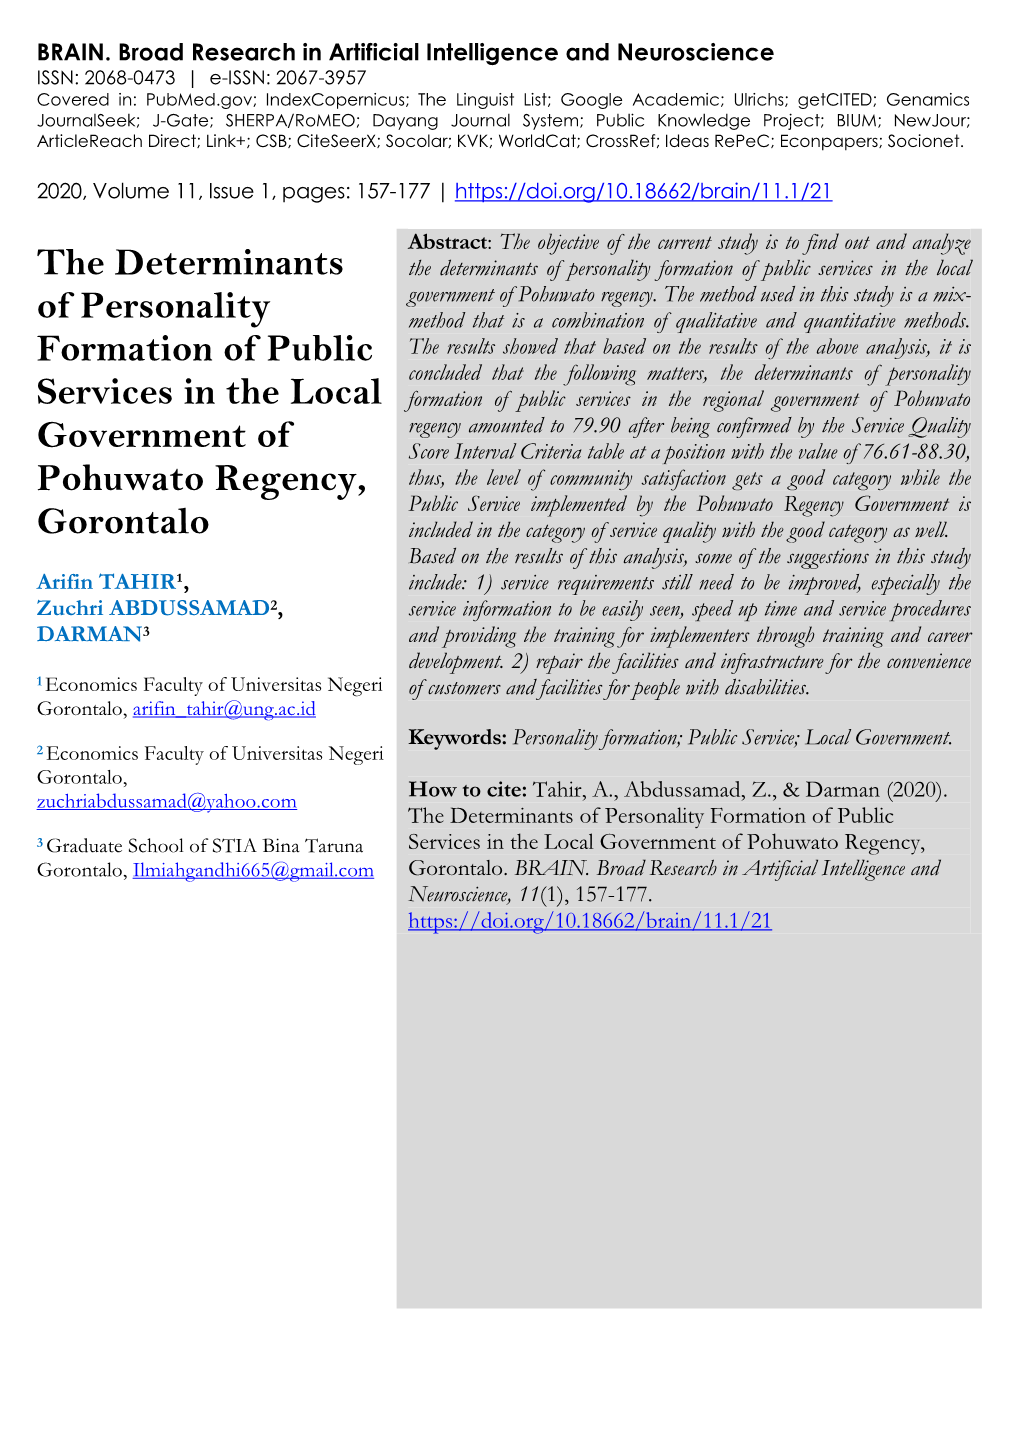 The Determinants of Personality Formation of Public Services in the Local Government of Pohuwato Regency, Gorontalo”